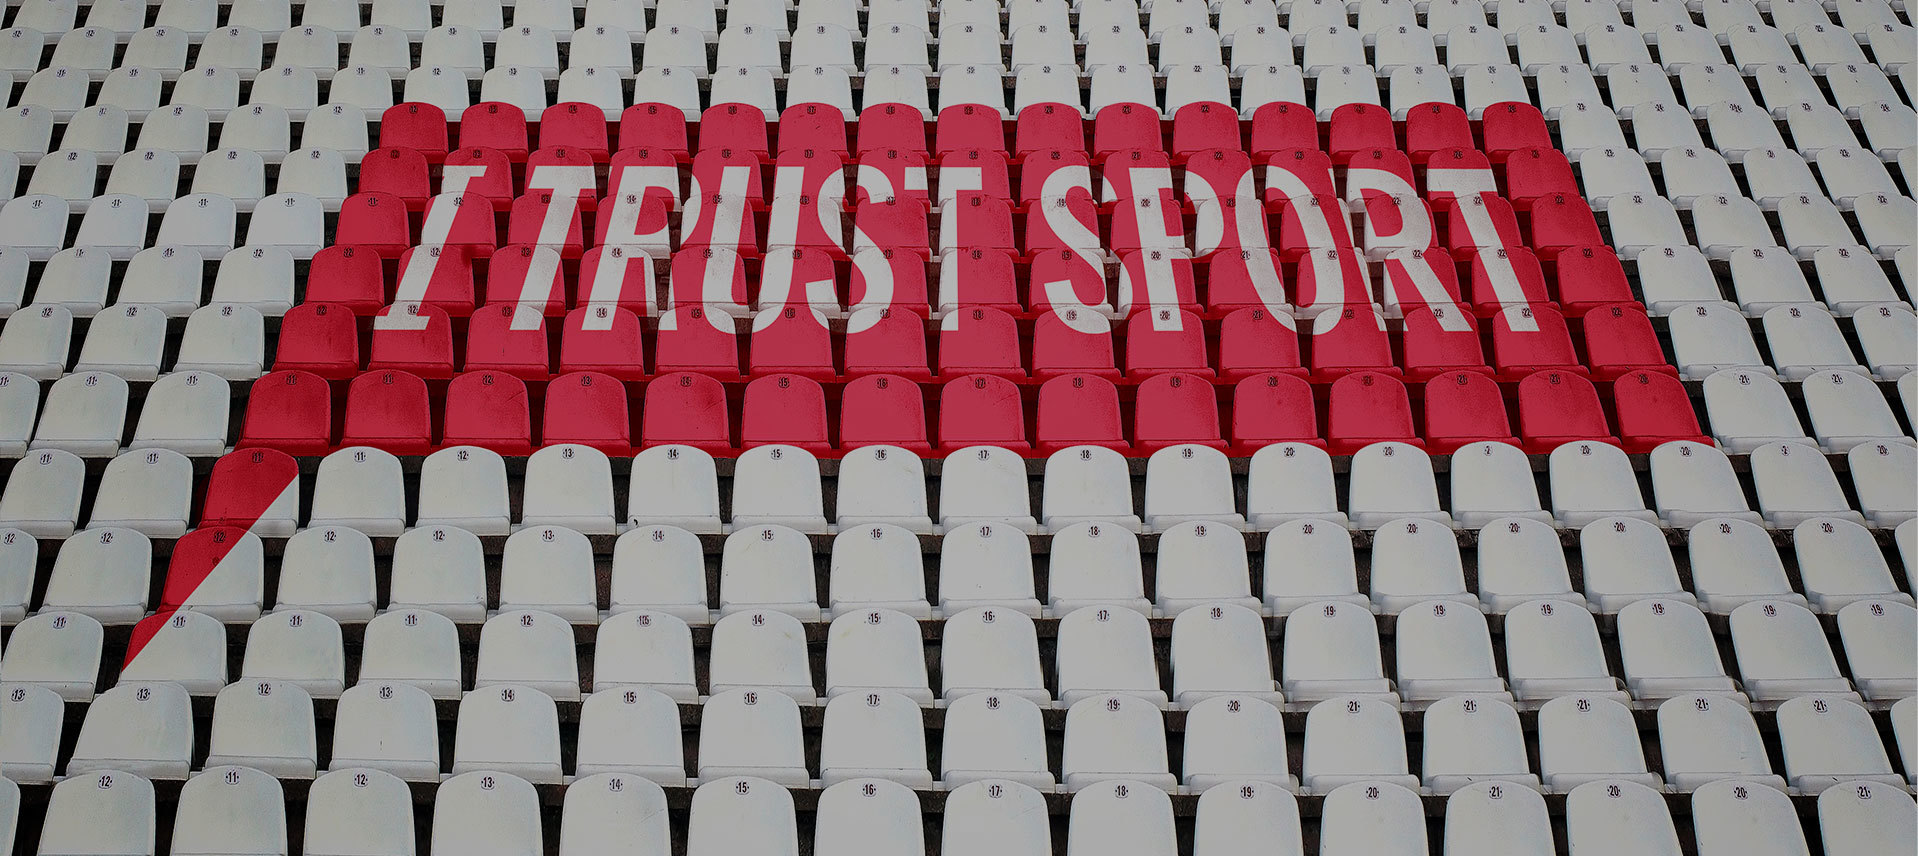 I Trust Sport provides support for ASOIF governance review of summer Olympic sports